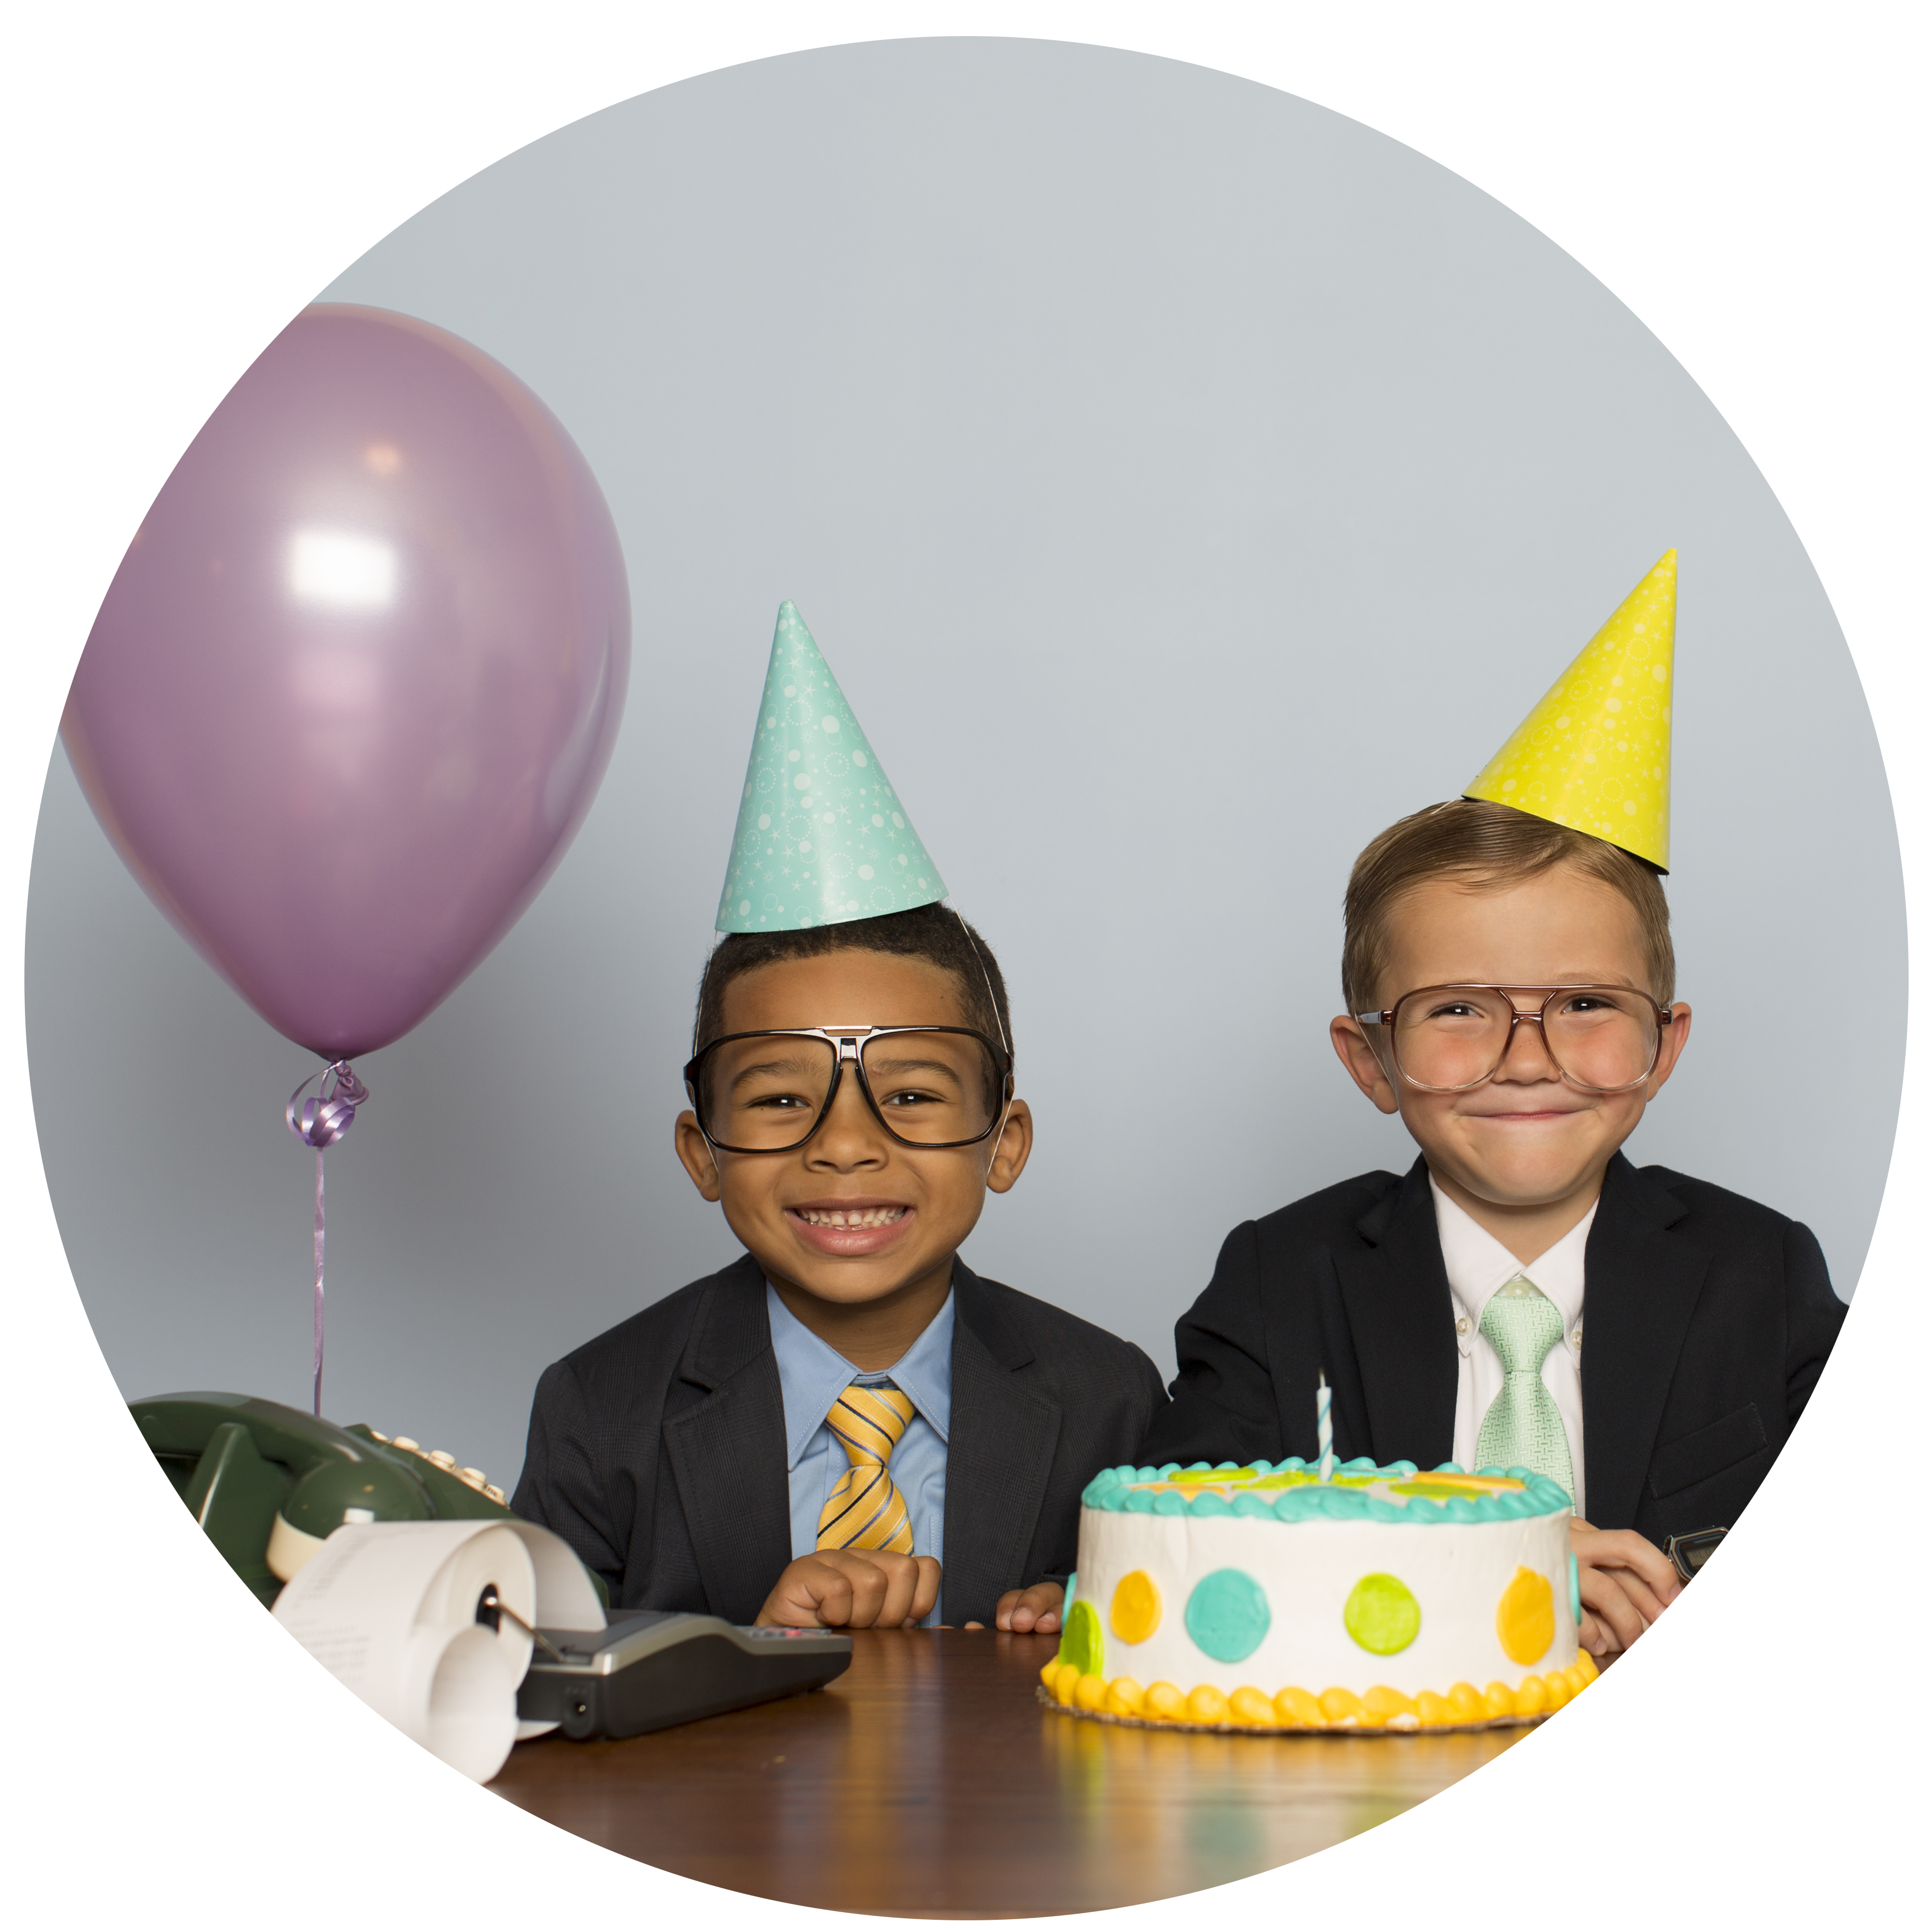 kids in business suits with party hats, balloon, and cake